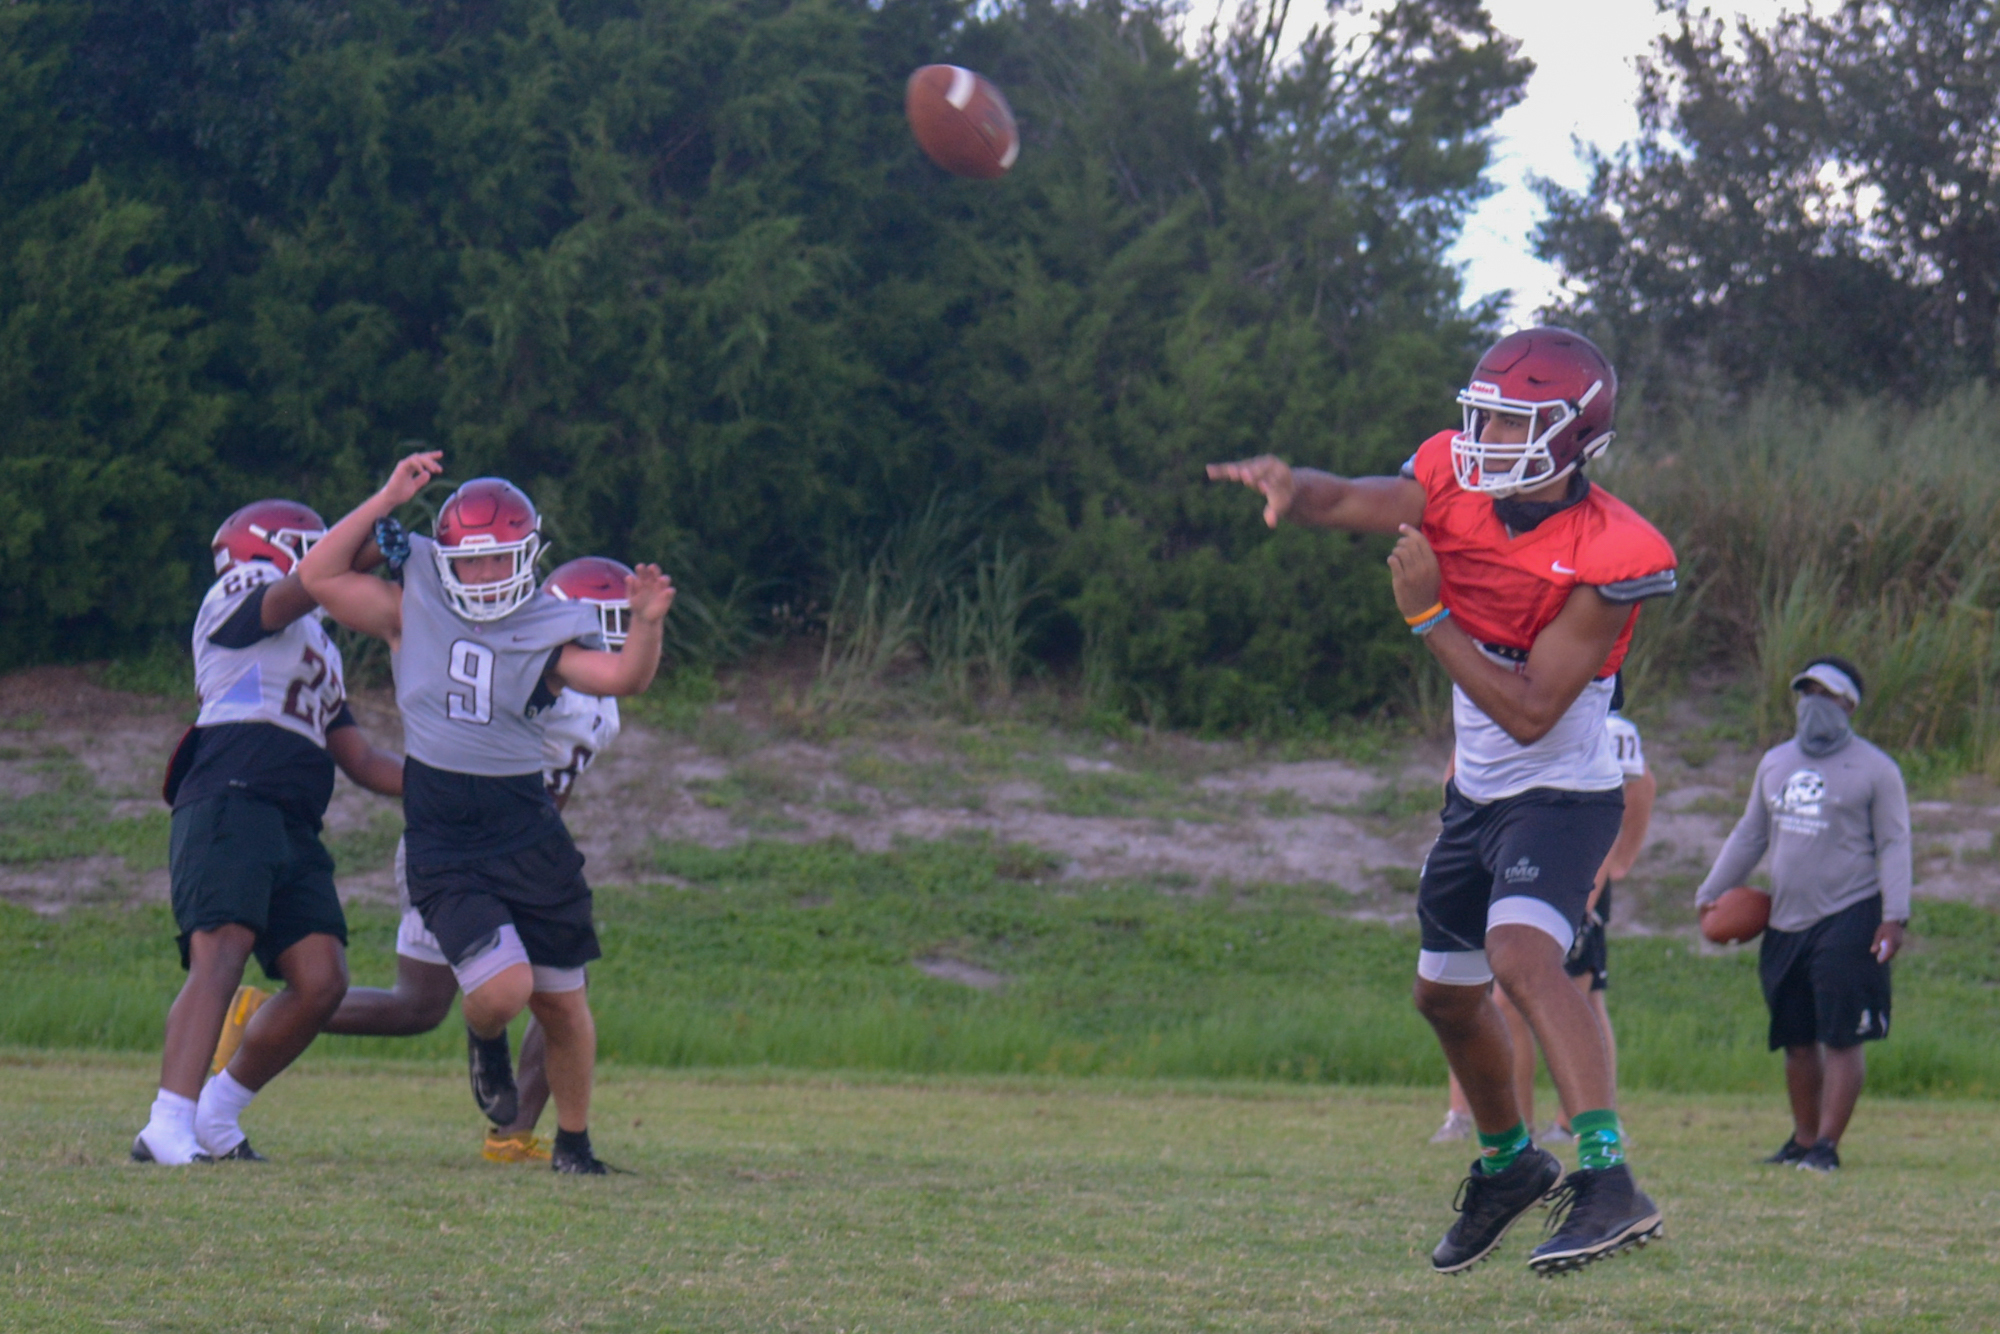 Braden River quarterback Shawqi Itraish (red jersey) floats a pass to the left side of the field during practice.